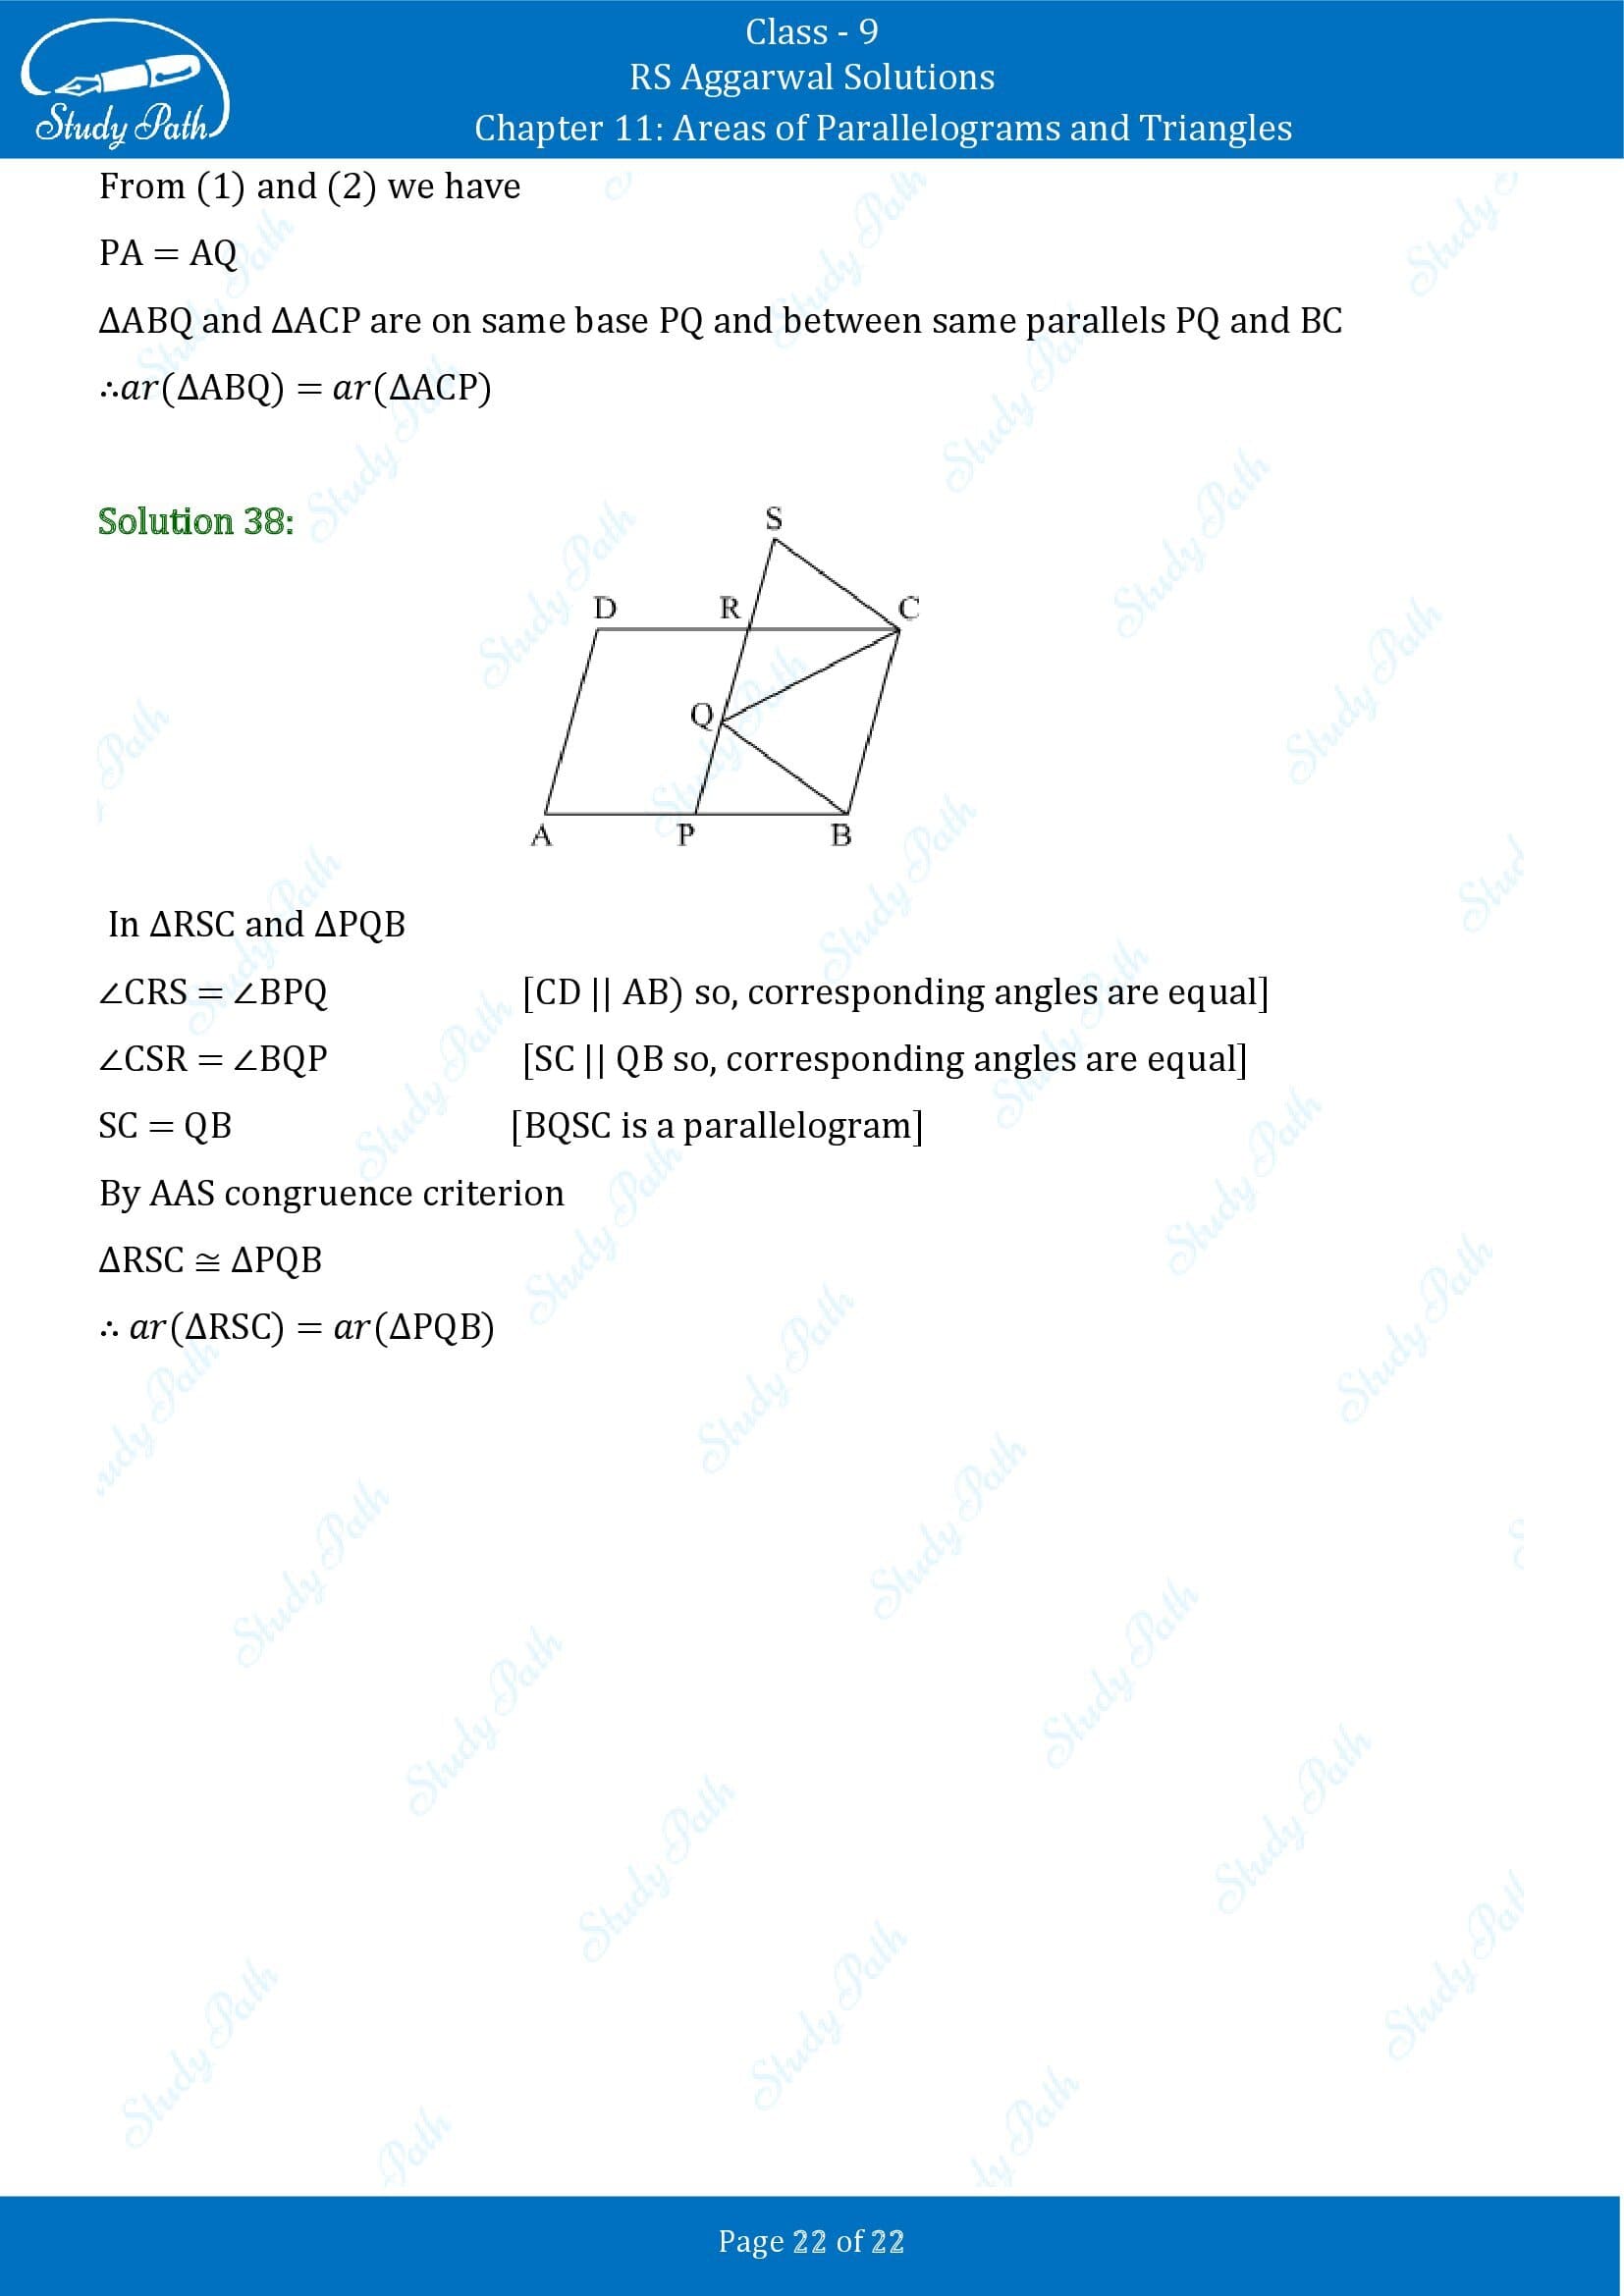 RS Aggarwal Solutions Class 9 Chapter 11 Areas of Parallelograms and Triangles Exercise 11 00022